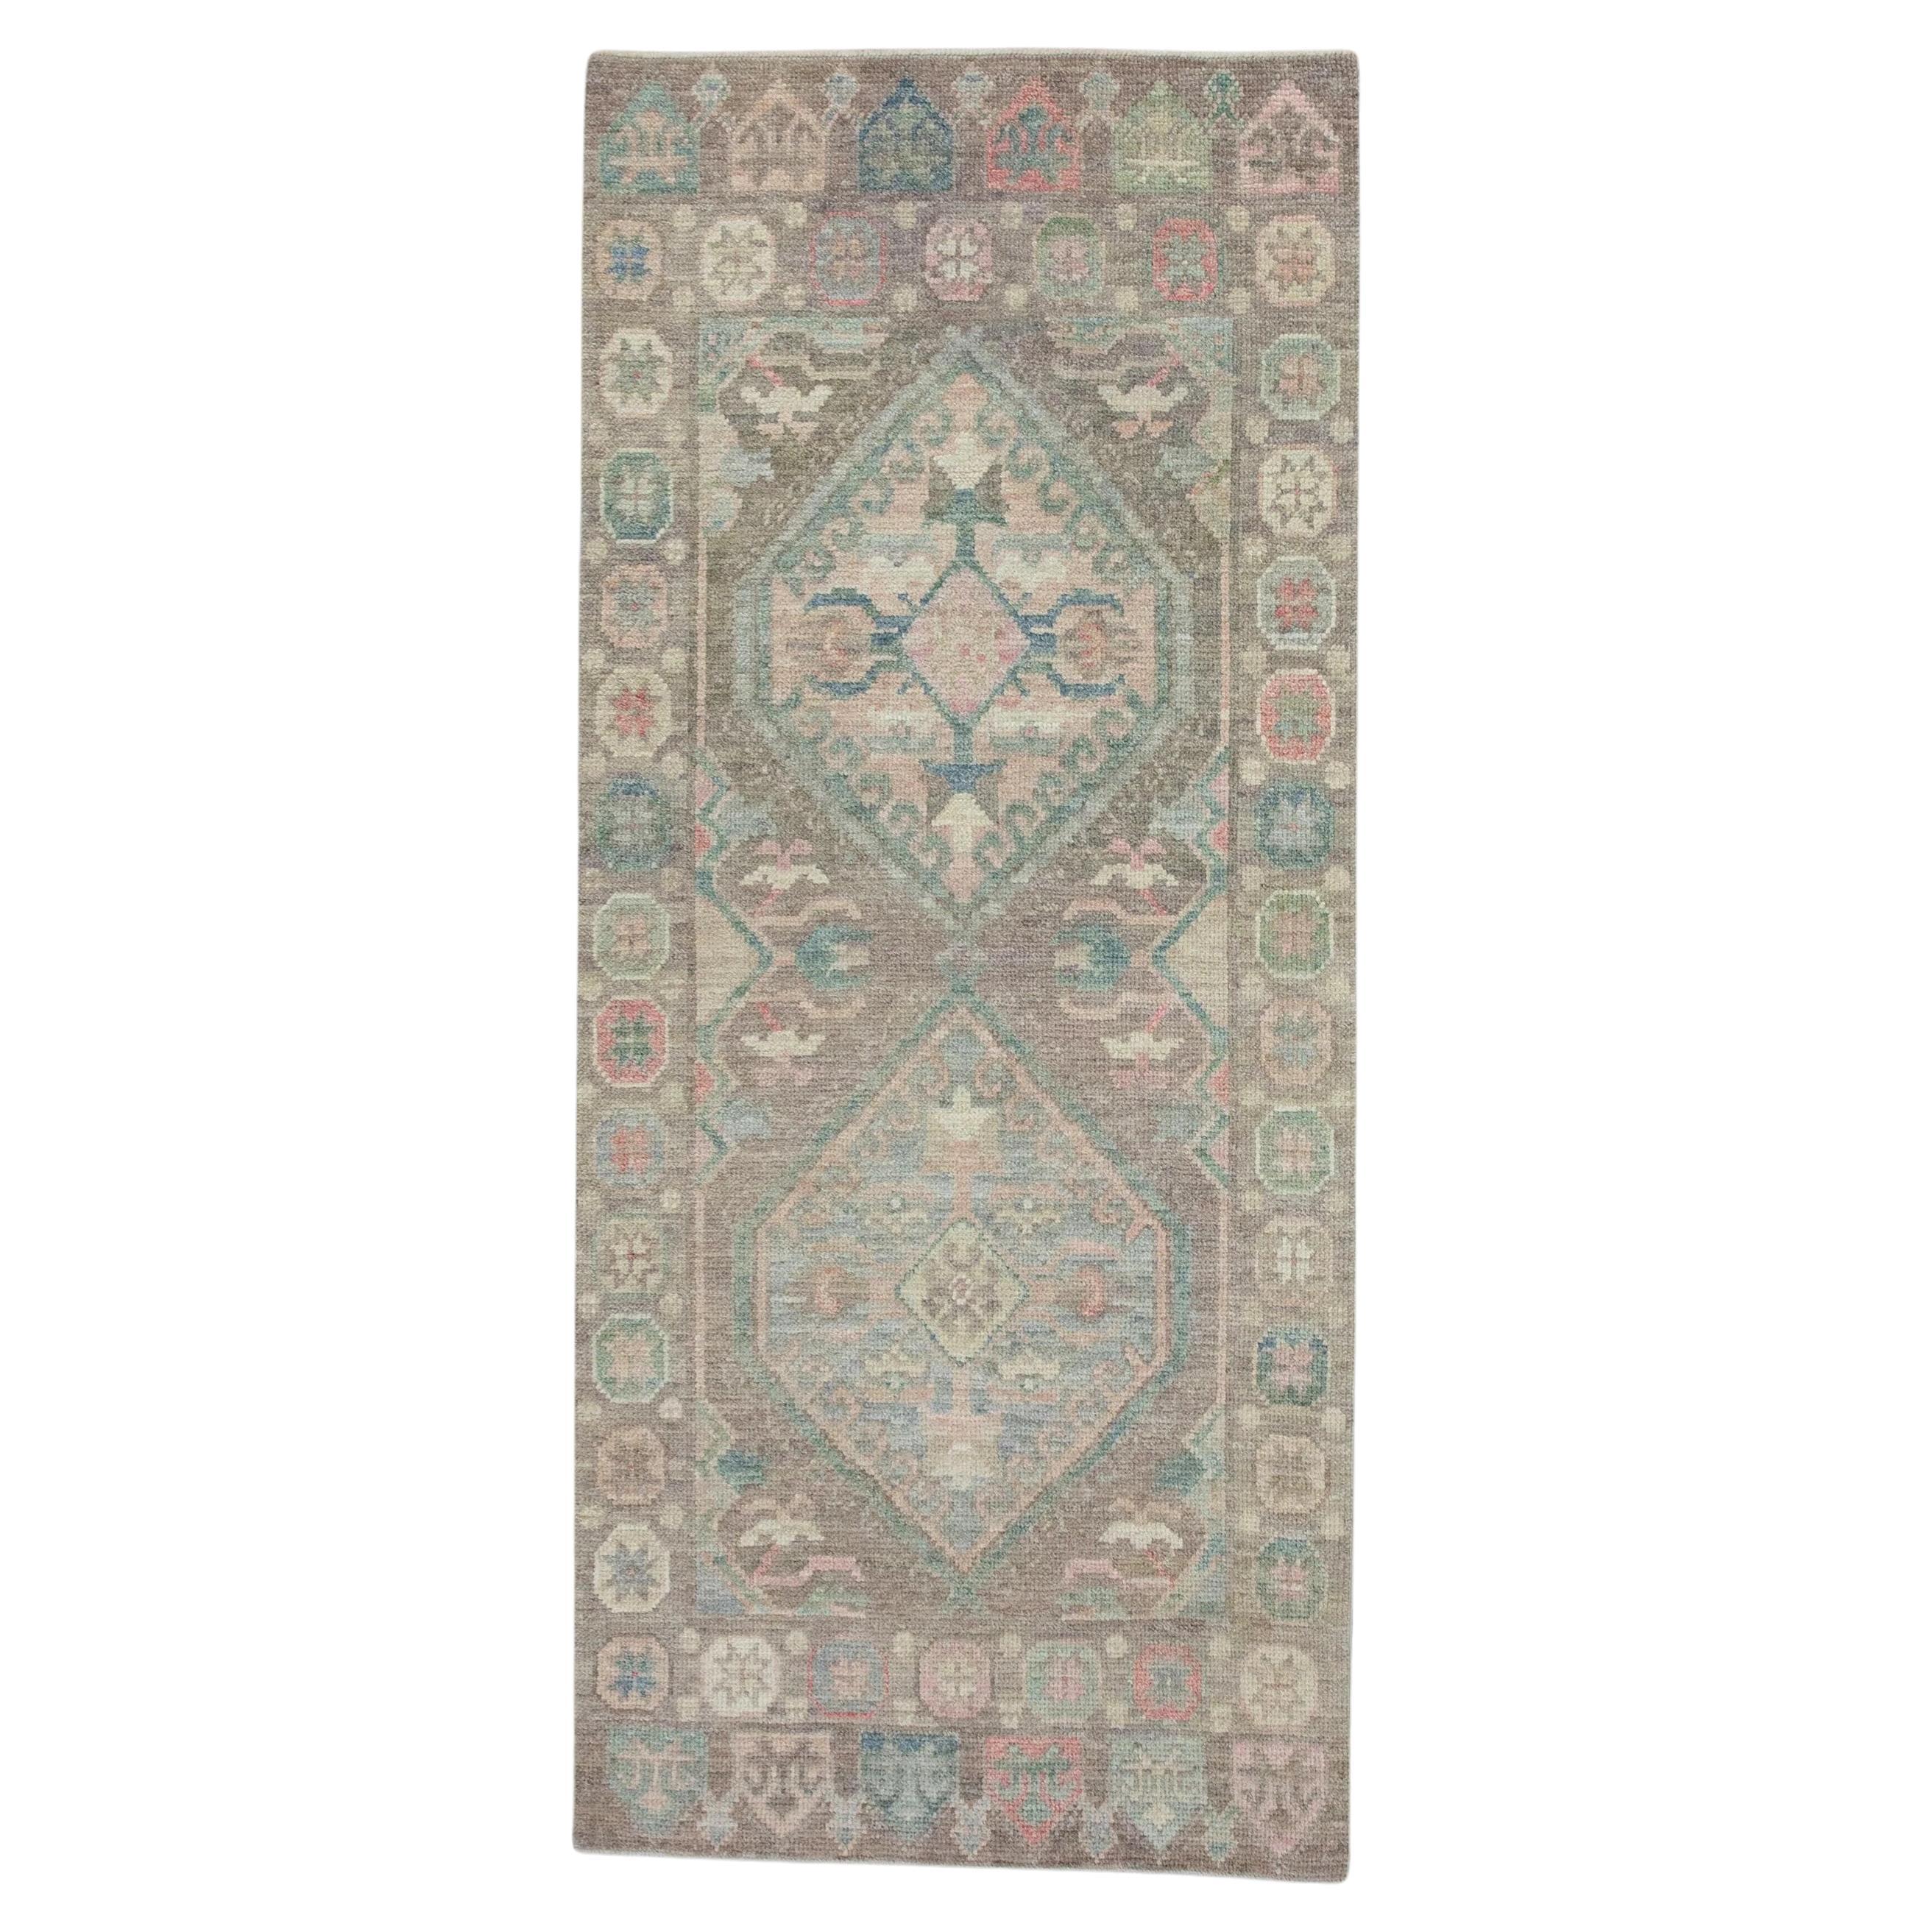 Colorful Geometric Medallion Handwoven Wool Turkish Oushak Rug 3' x 6'9" For Sale